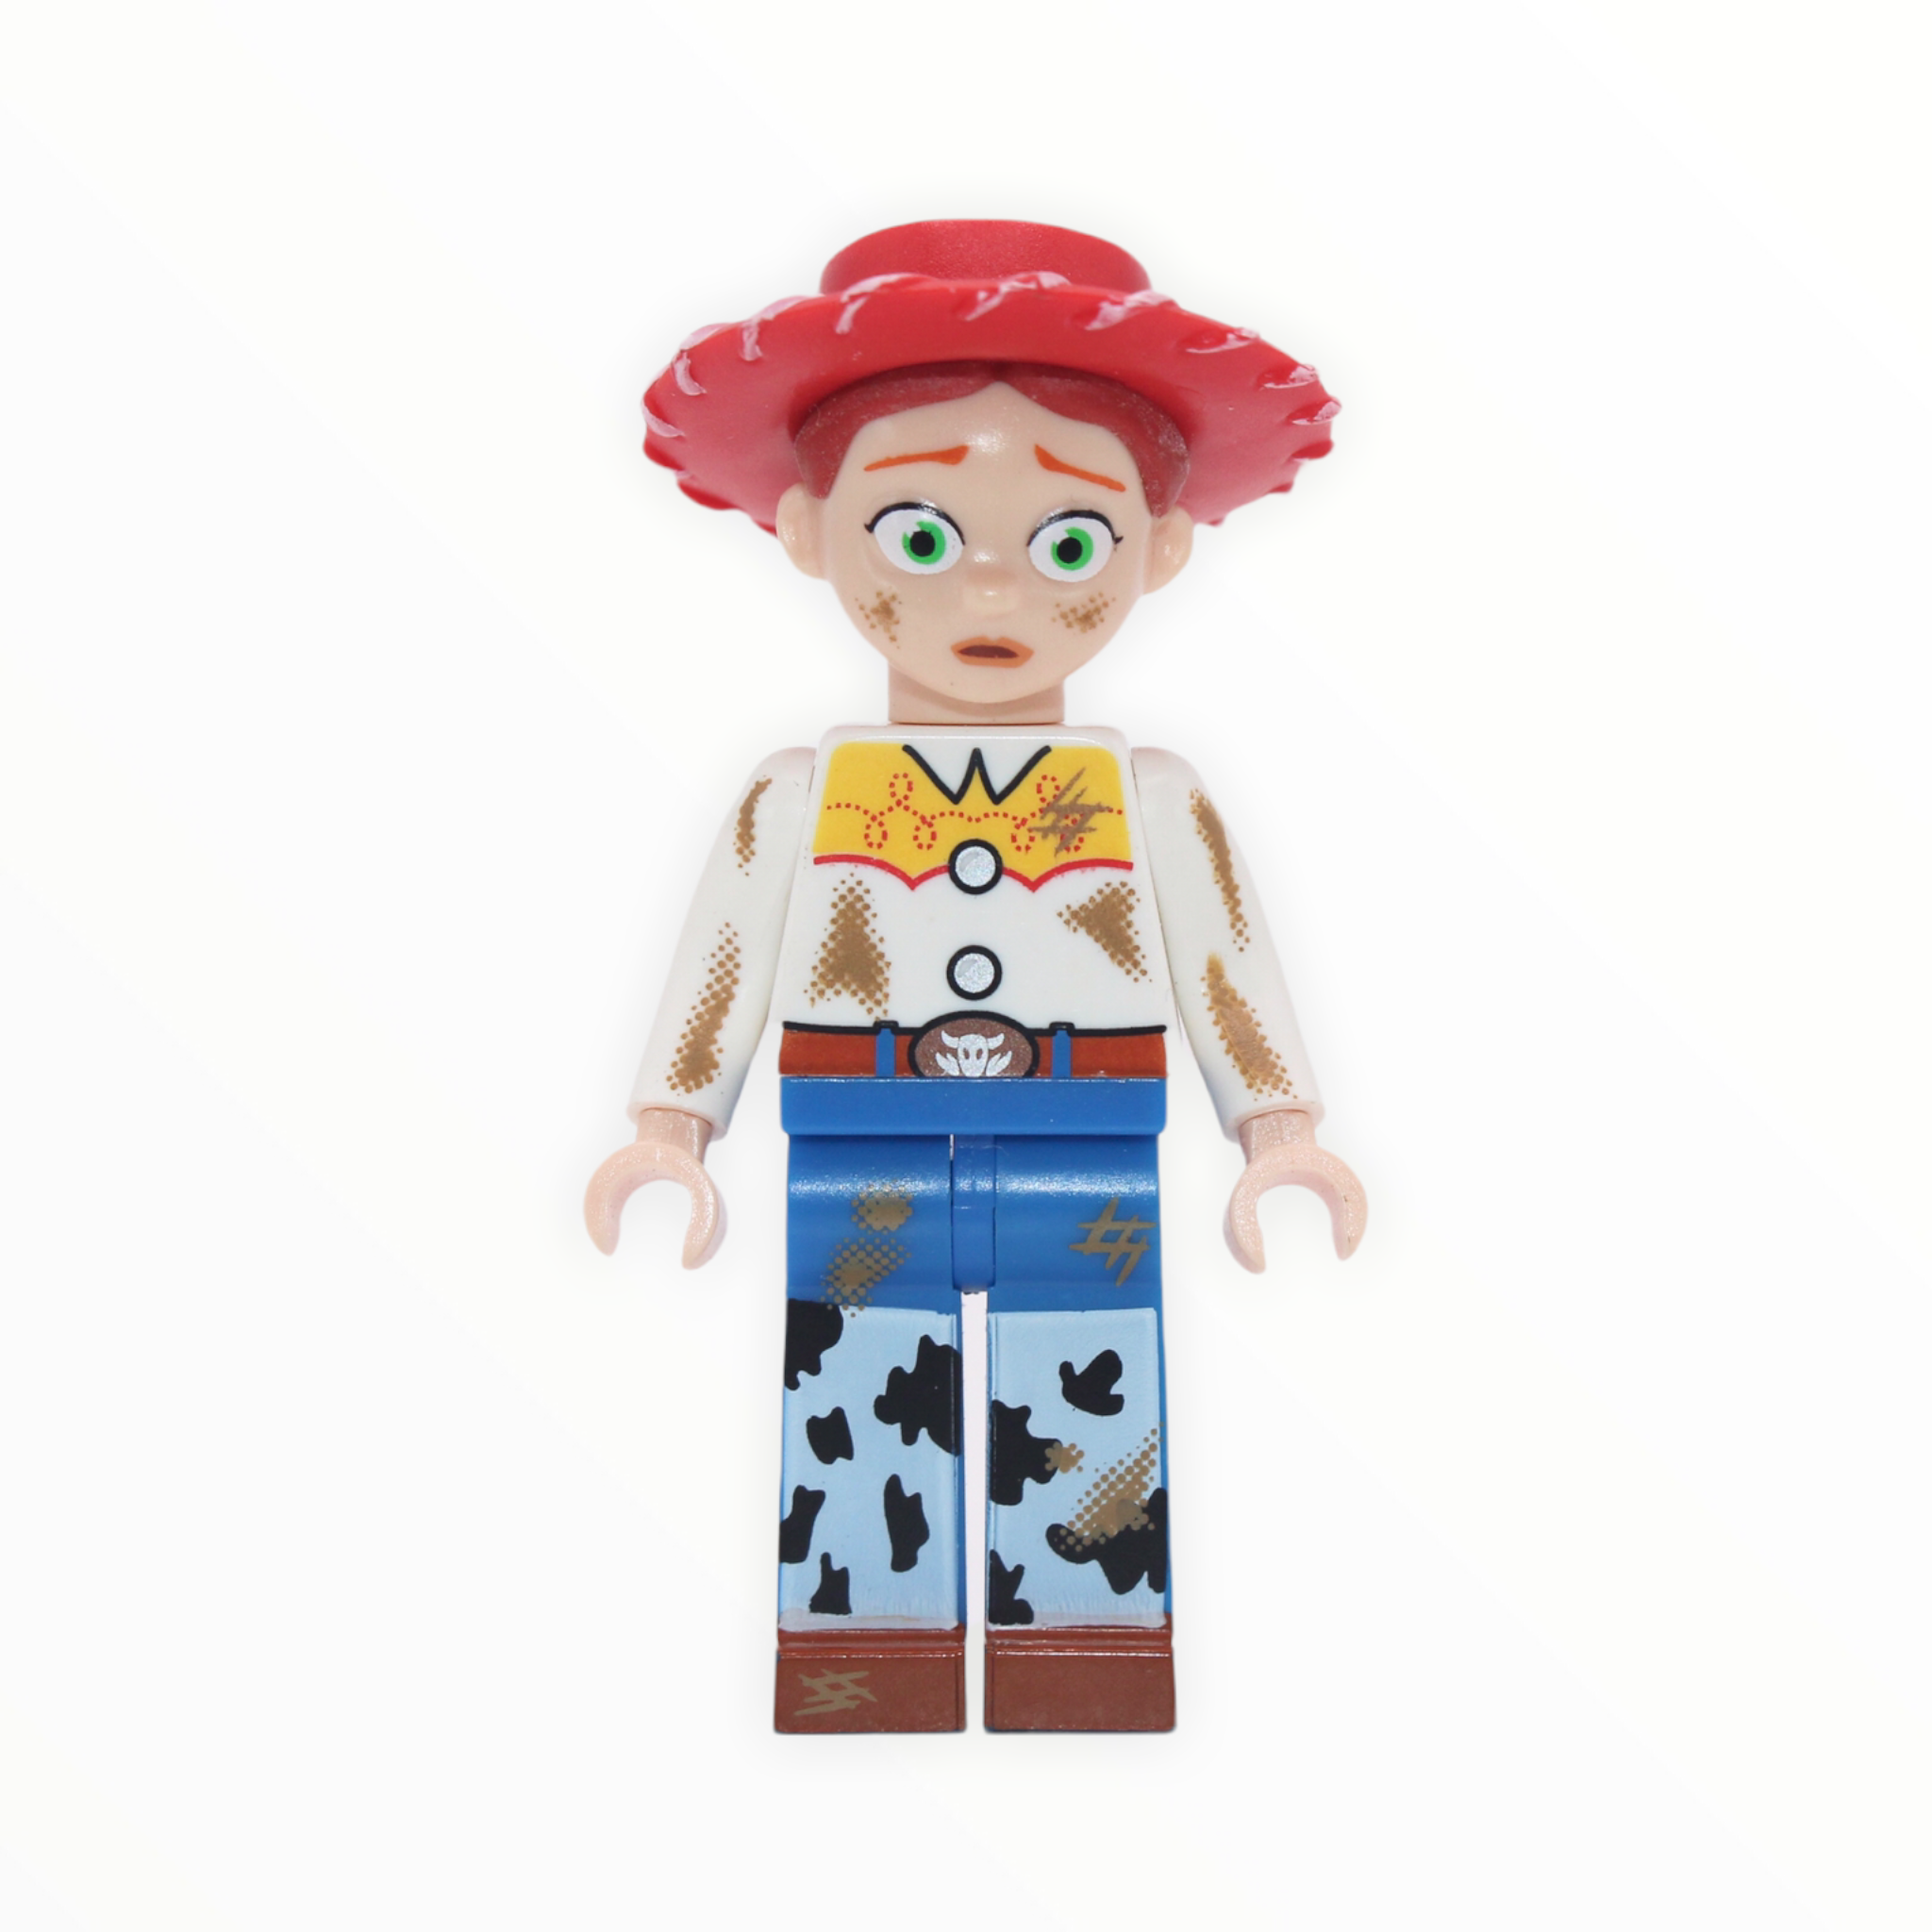 Jessie (Toy Story 3, dirt stains)